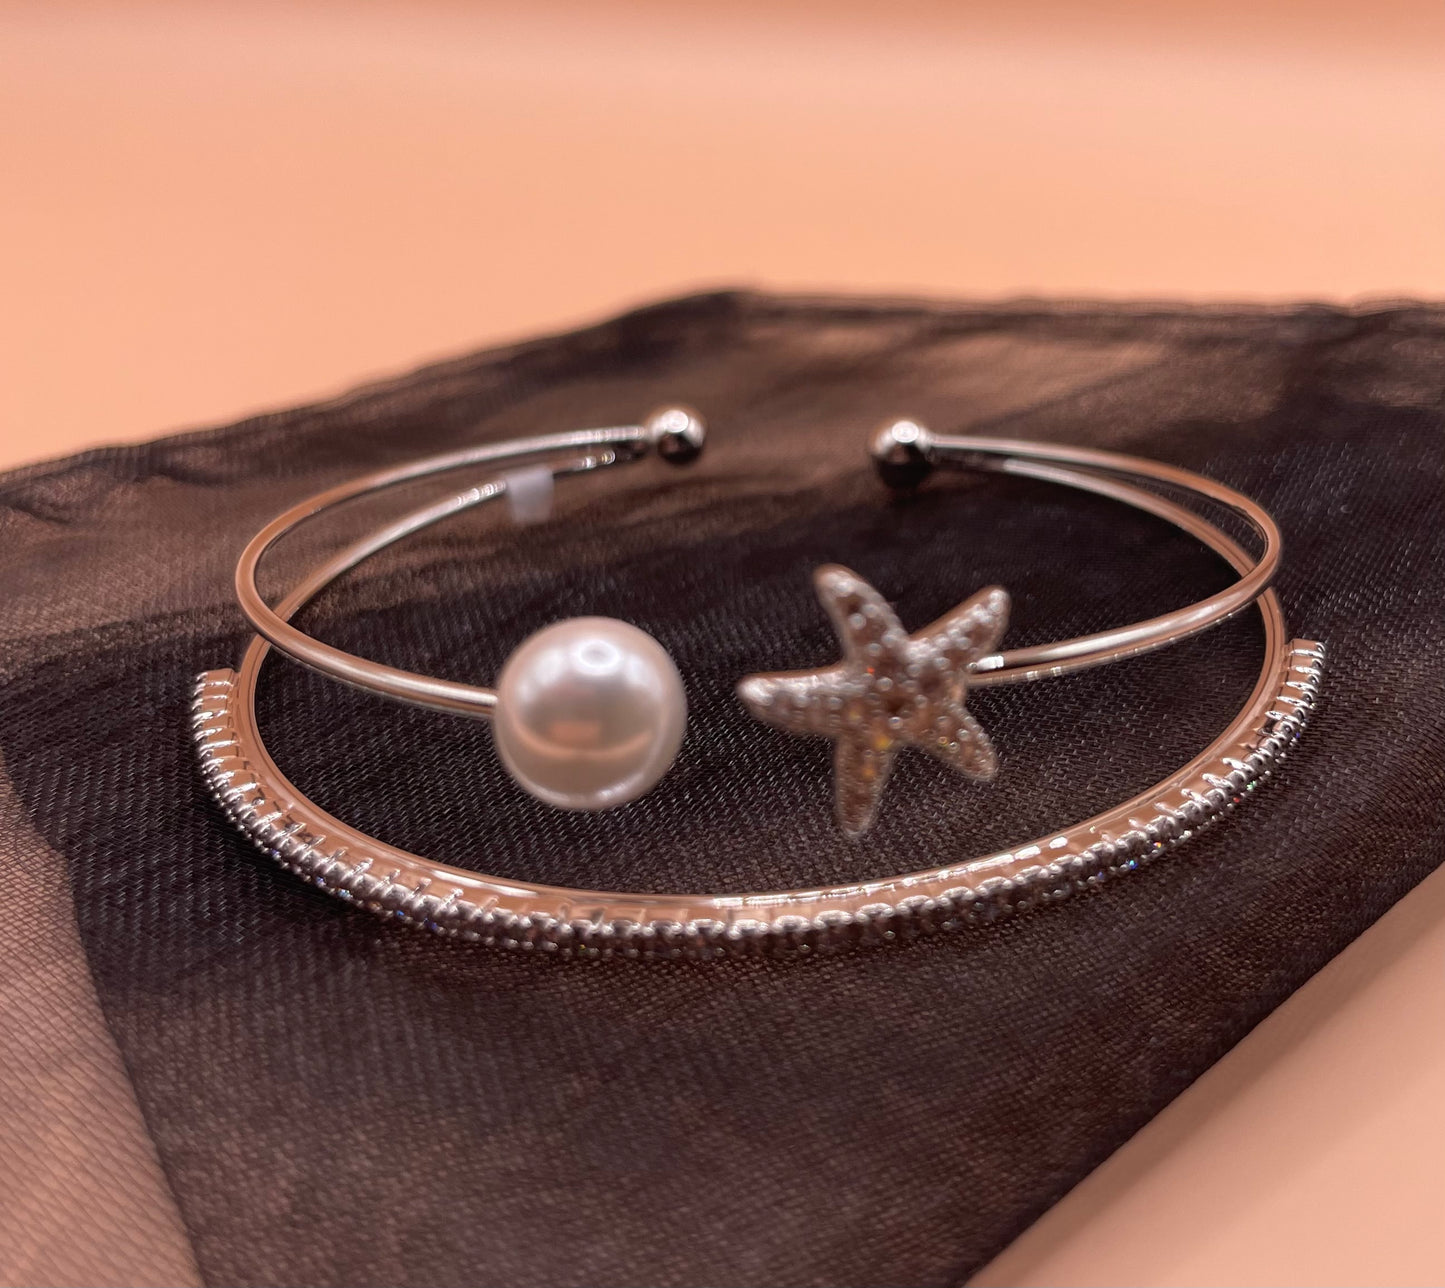 Crystal Avenue Adelaide Crystal Goldtone Cuff Bracelet with Pearl and a Star